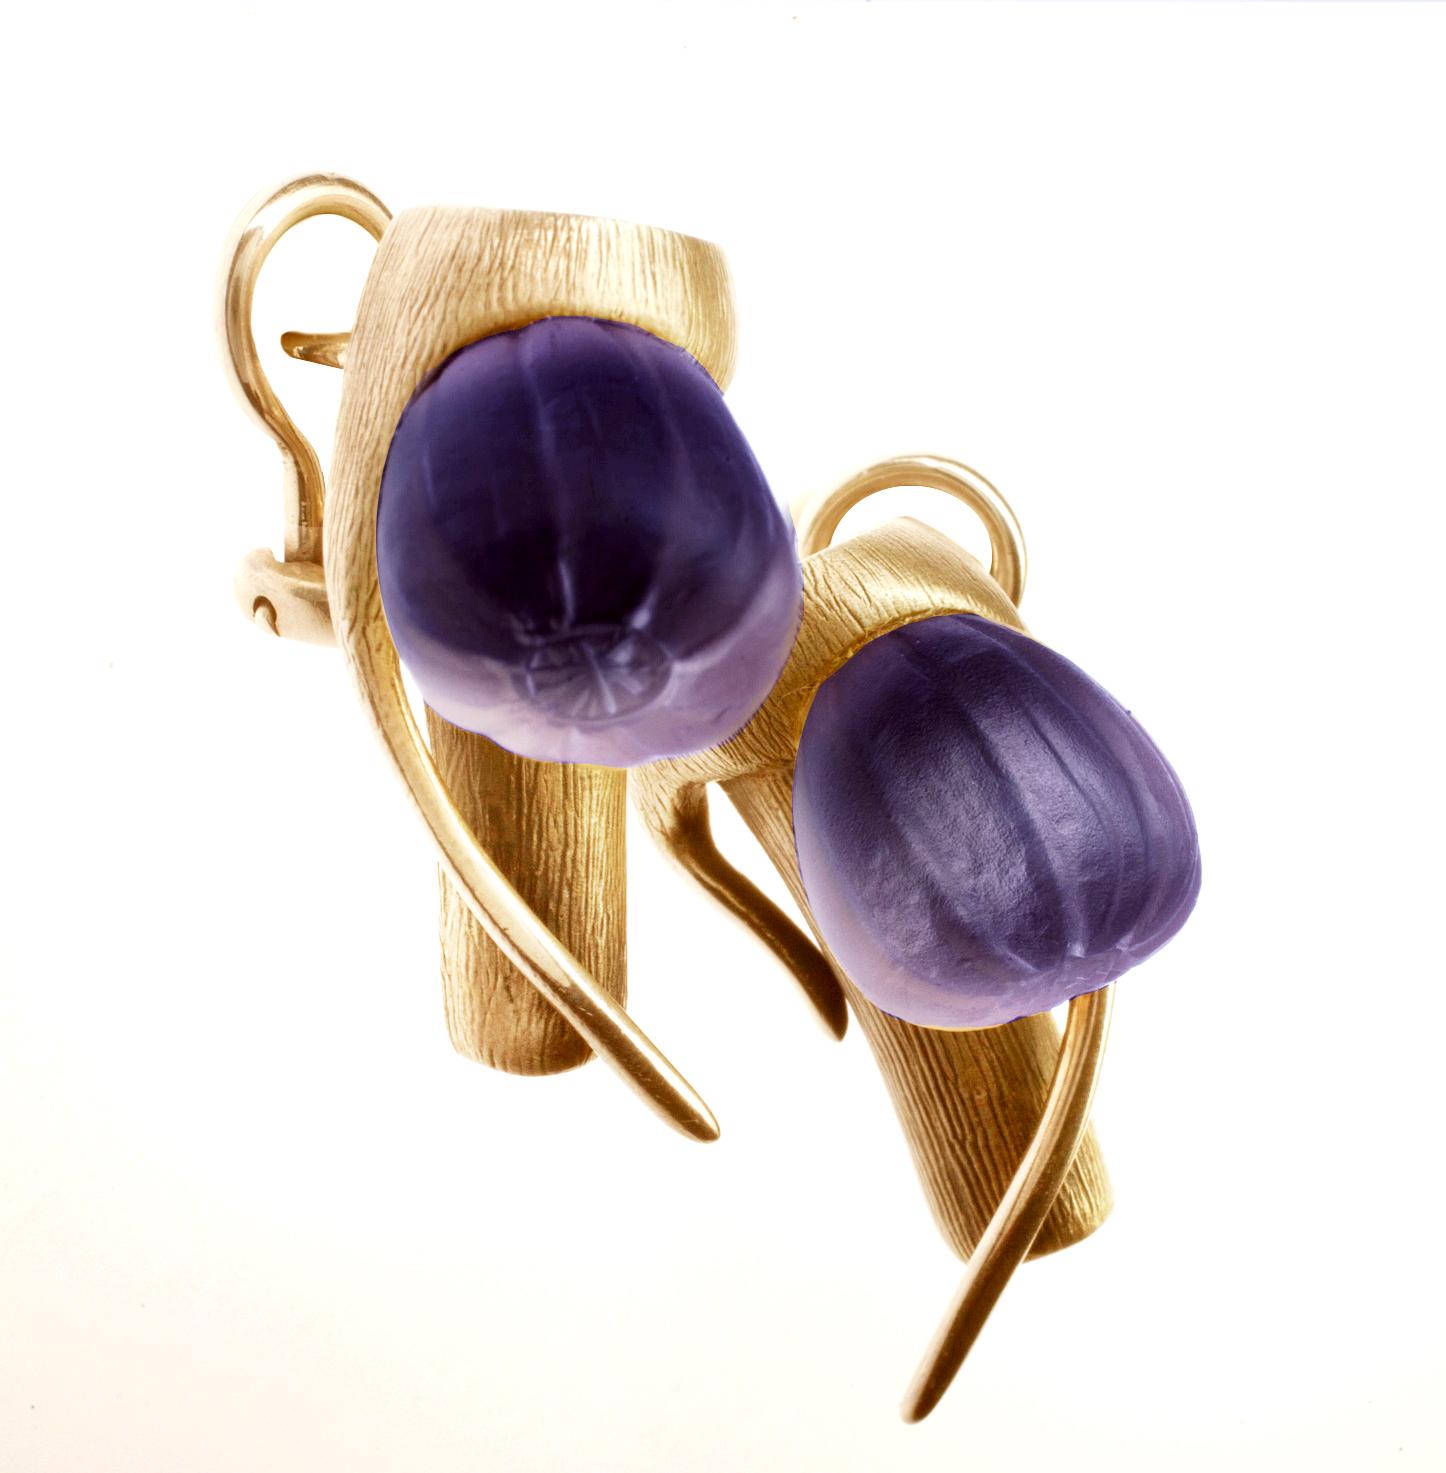 These contemporary Fig cocktail stud earrings are made of 18 karat rose gold with tender frosted amethyst. The collection was featured in Harper's Bazaar UA editorial and a published issue. The earrings were chosen by actress Anne Ratte-Polle to